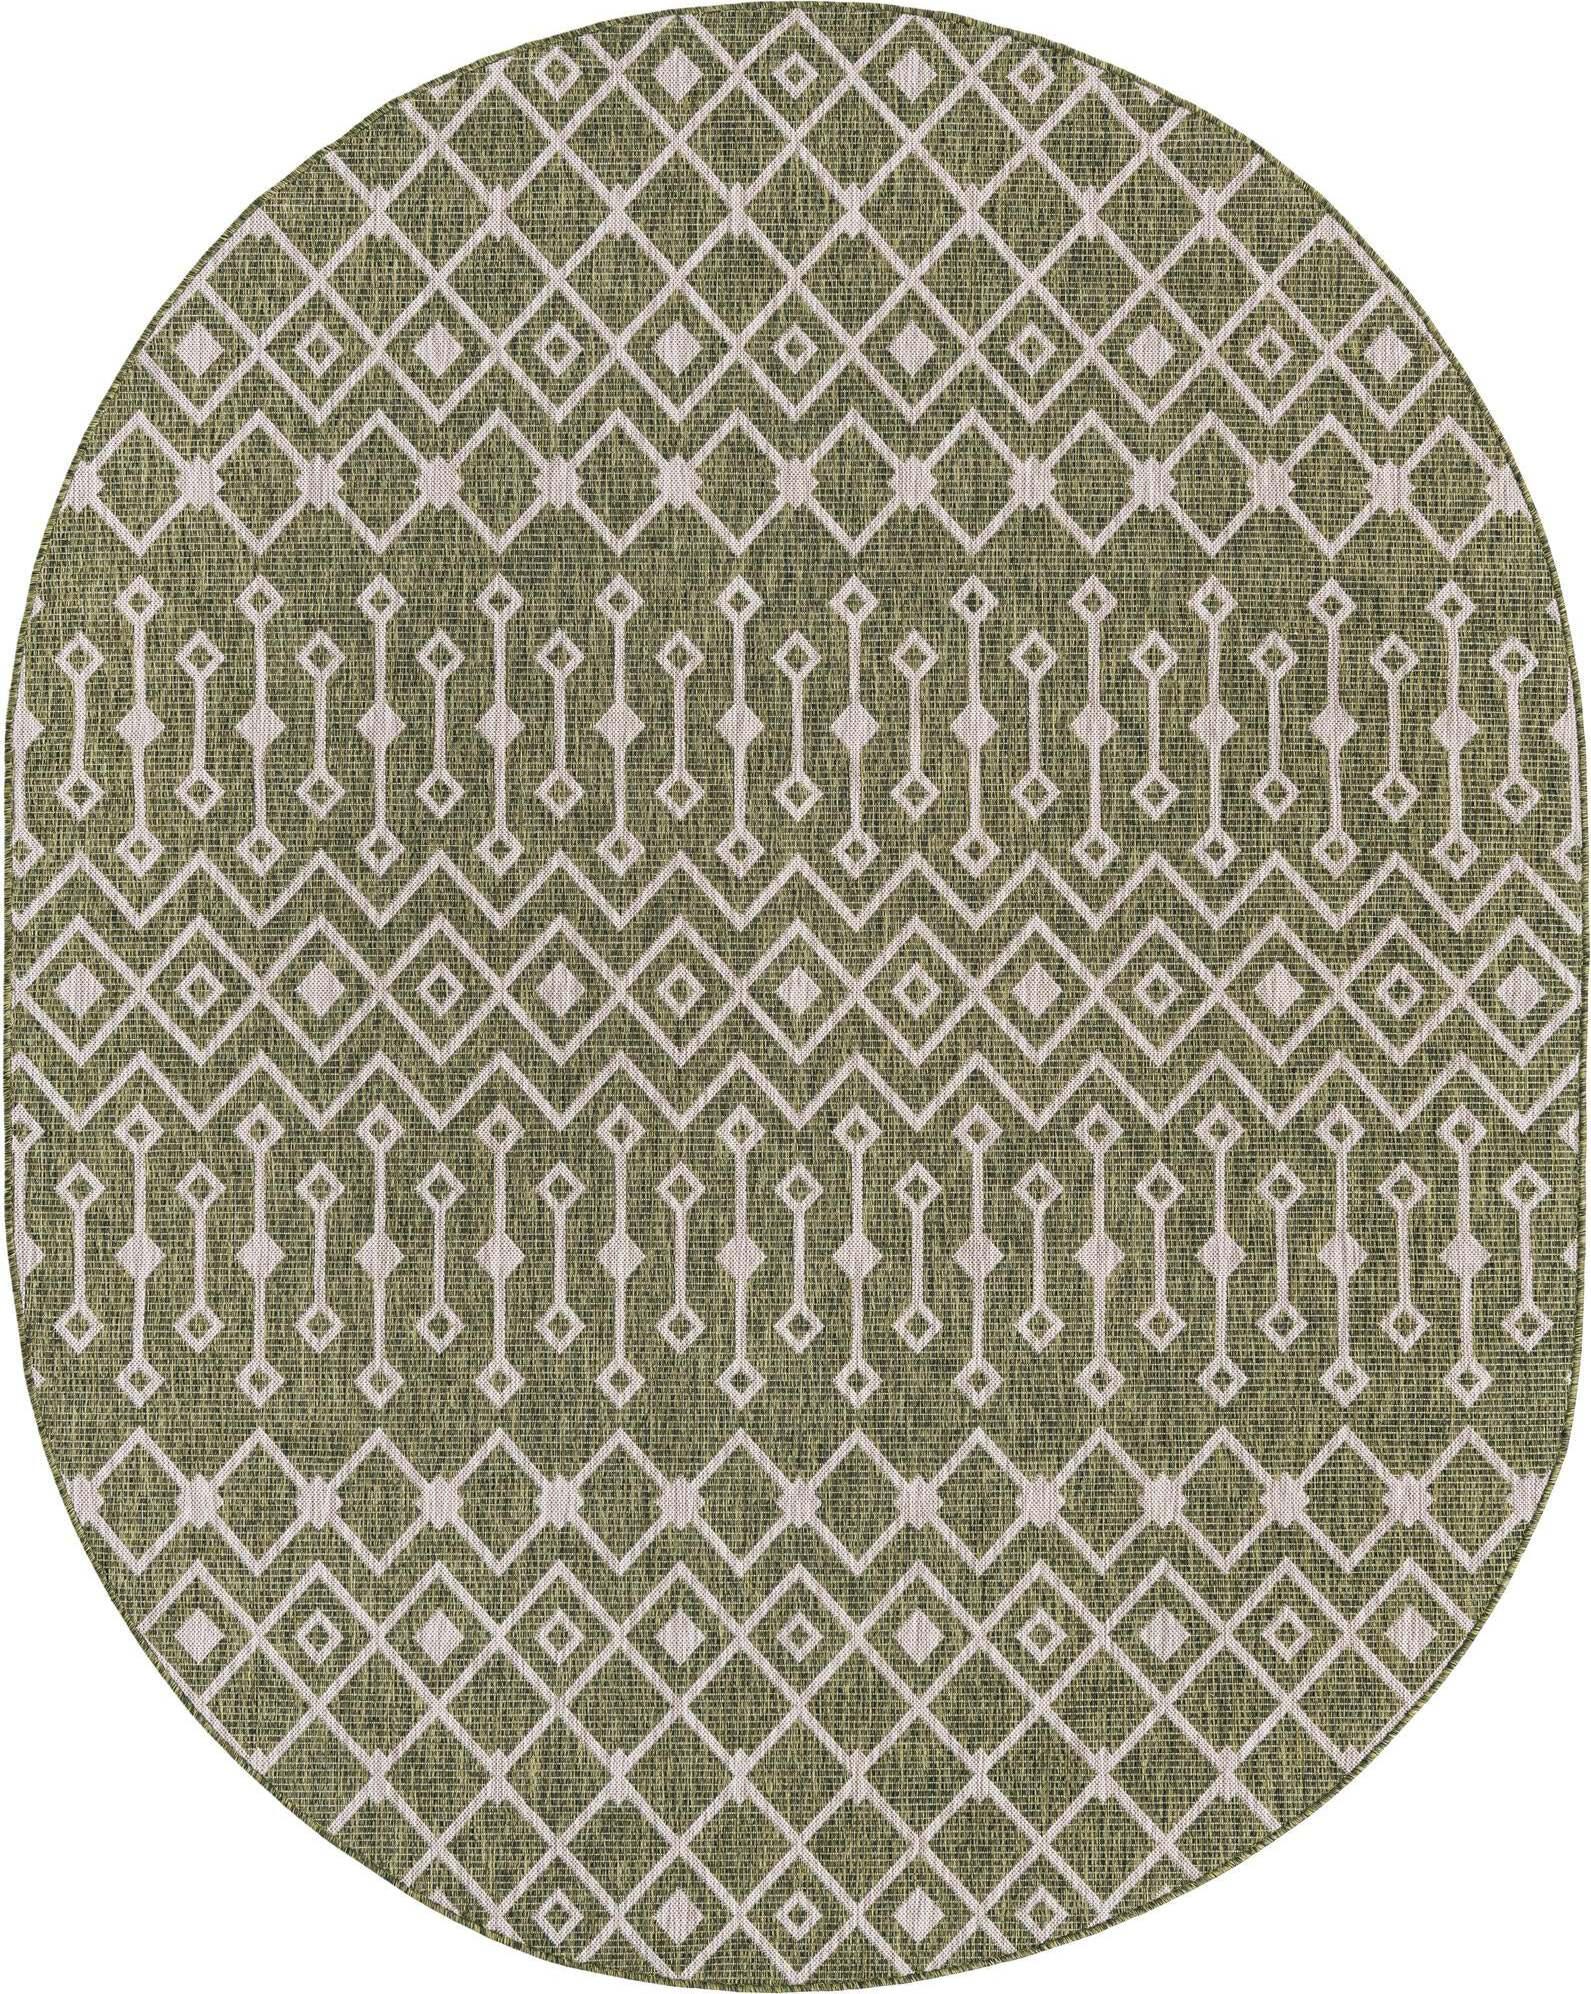 Unique Loom Outdoor Rugs - Outdoor Trellis Geometric Oval 8x10 Oval Rug Green & Ivory